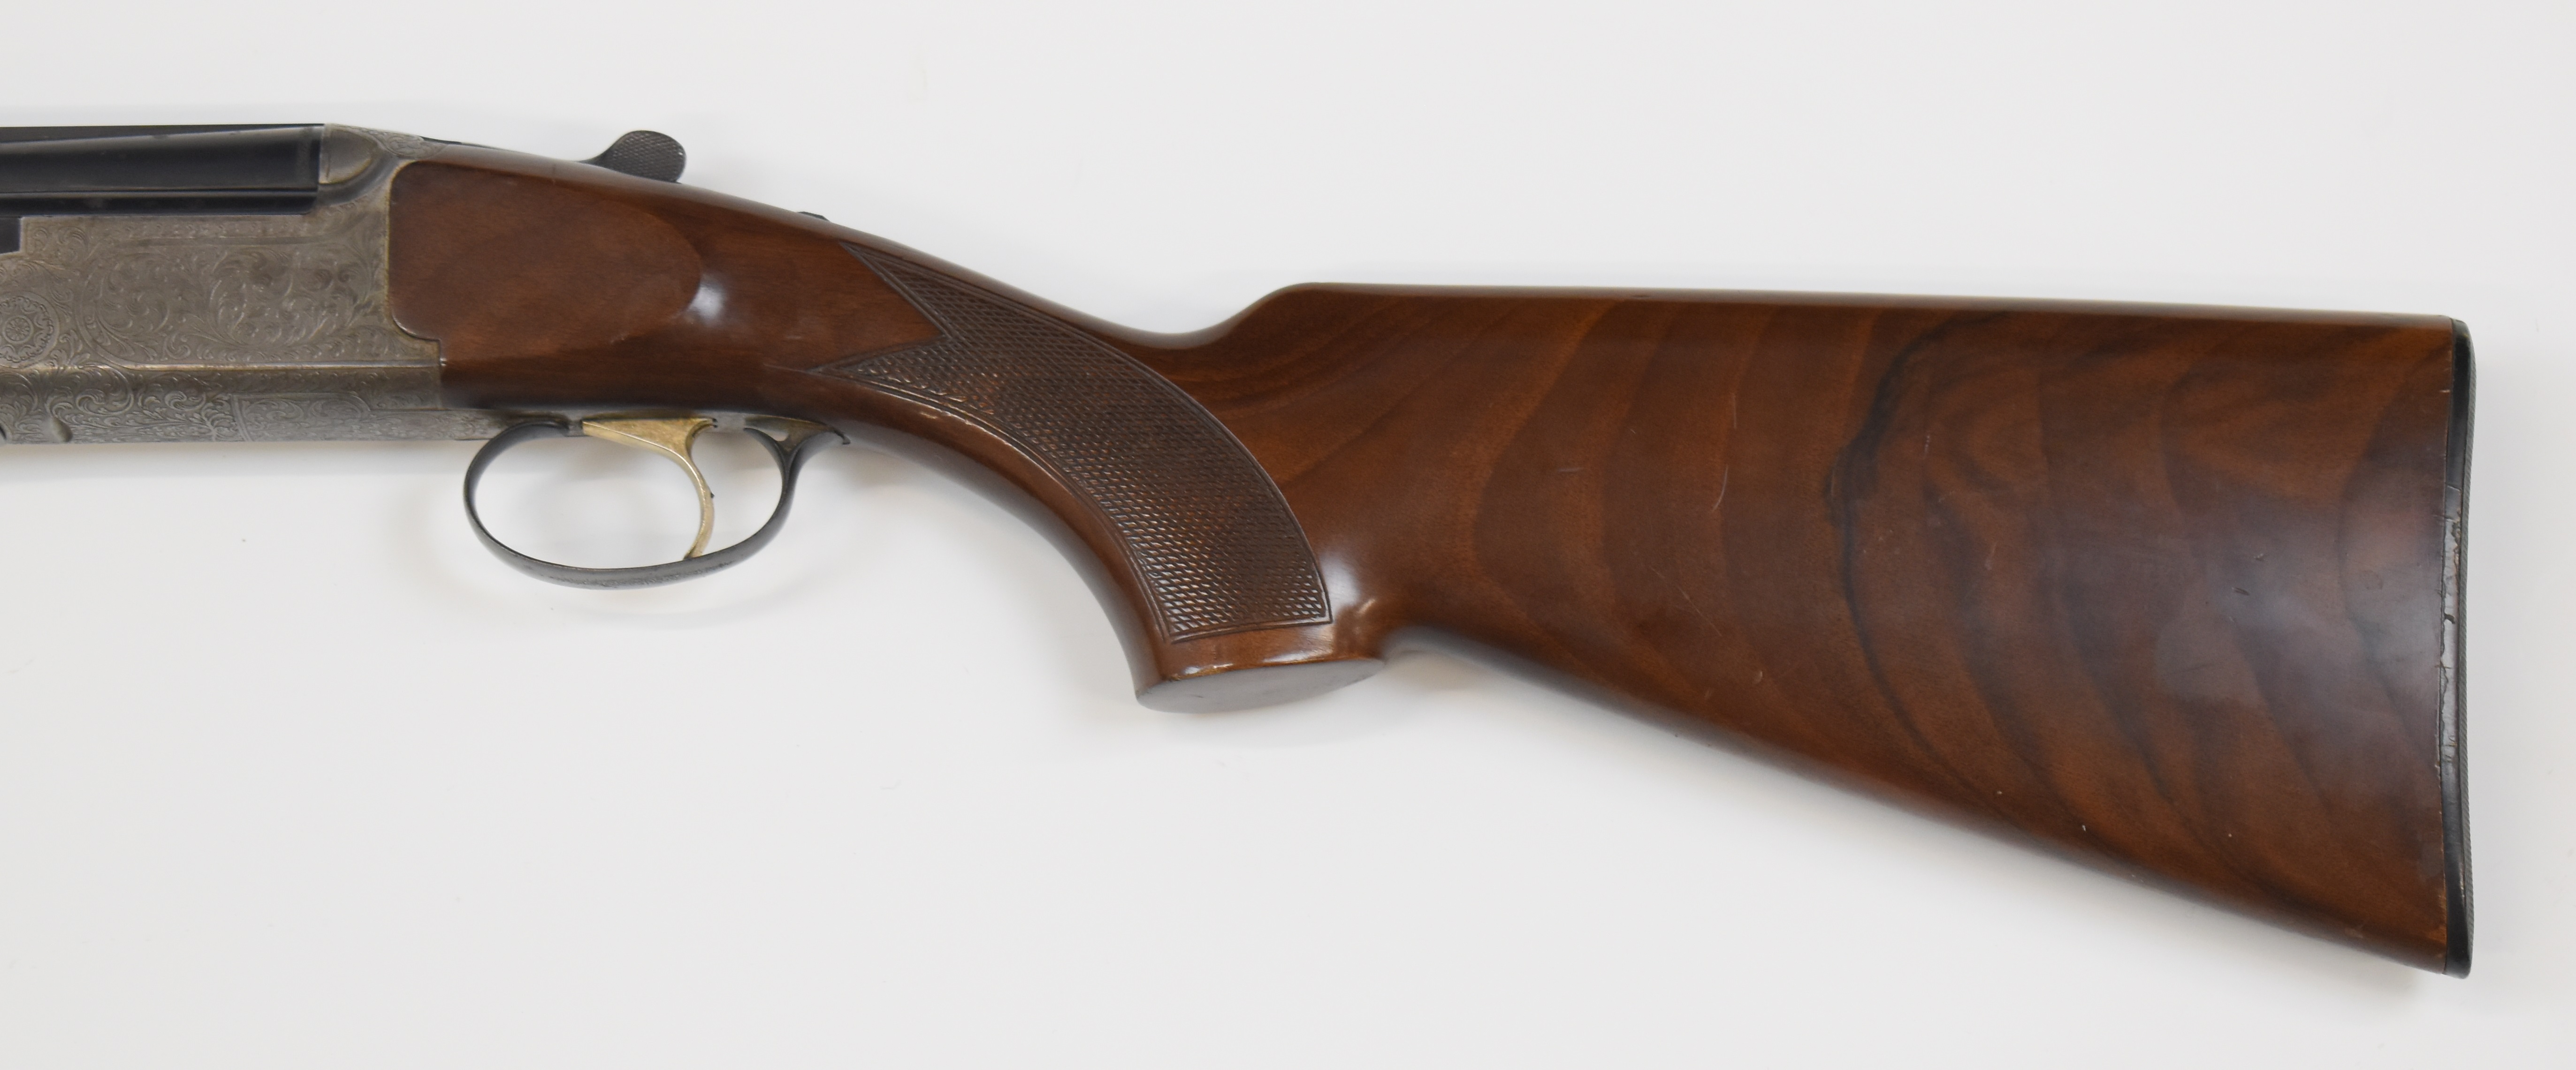 Sabatti 12 bore over under ejector shotgun with engraved lock, underside, top plate, trigger guard - Image 8 of 10